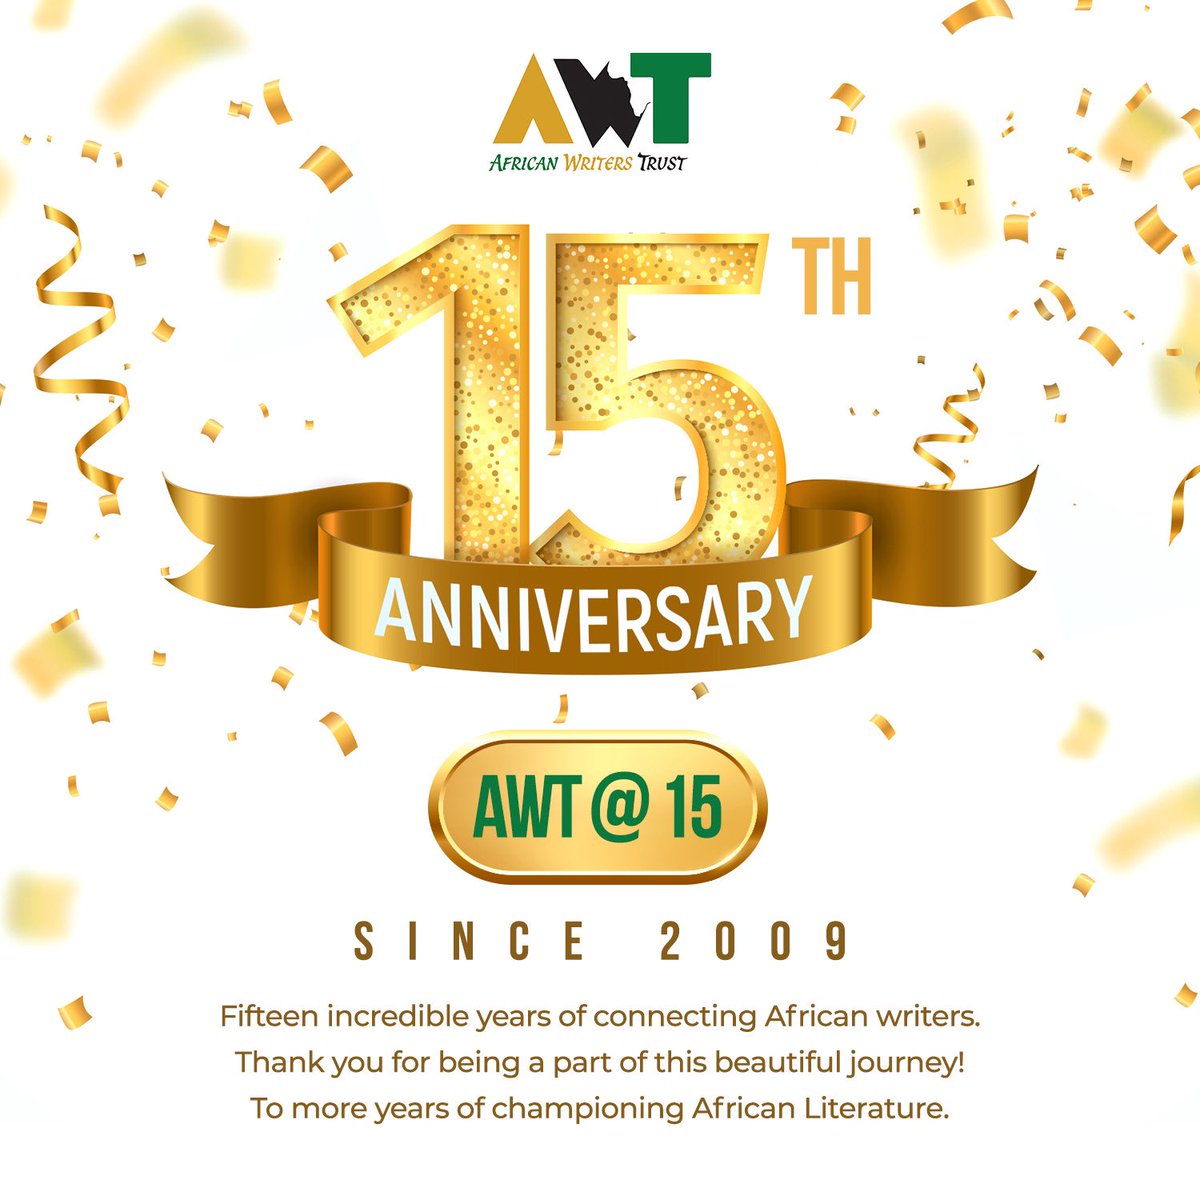 One of our programmes is publication of works written by our alumni. For our 15th anniversary, enjoy a 15% discount on book projects by our very own. Visit our online bookshop tubazeafricanbooks.com to place your orders.